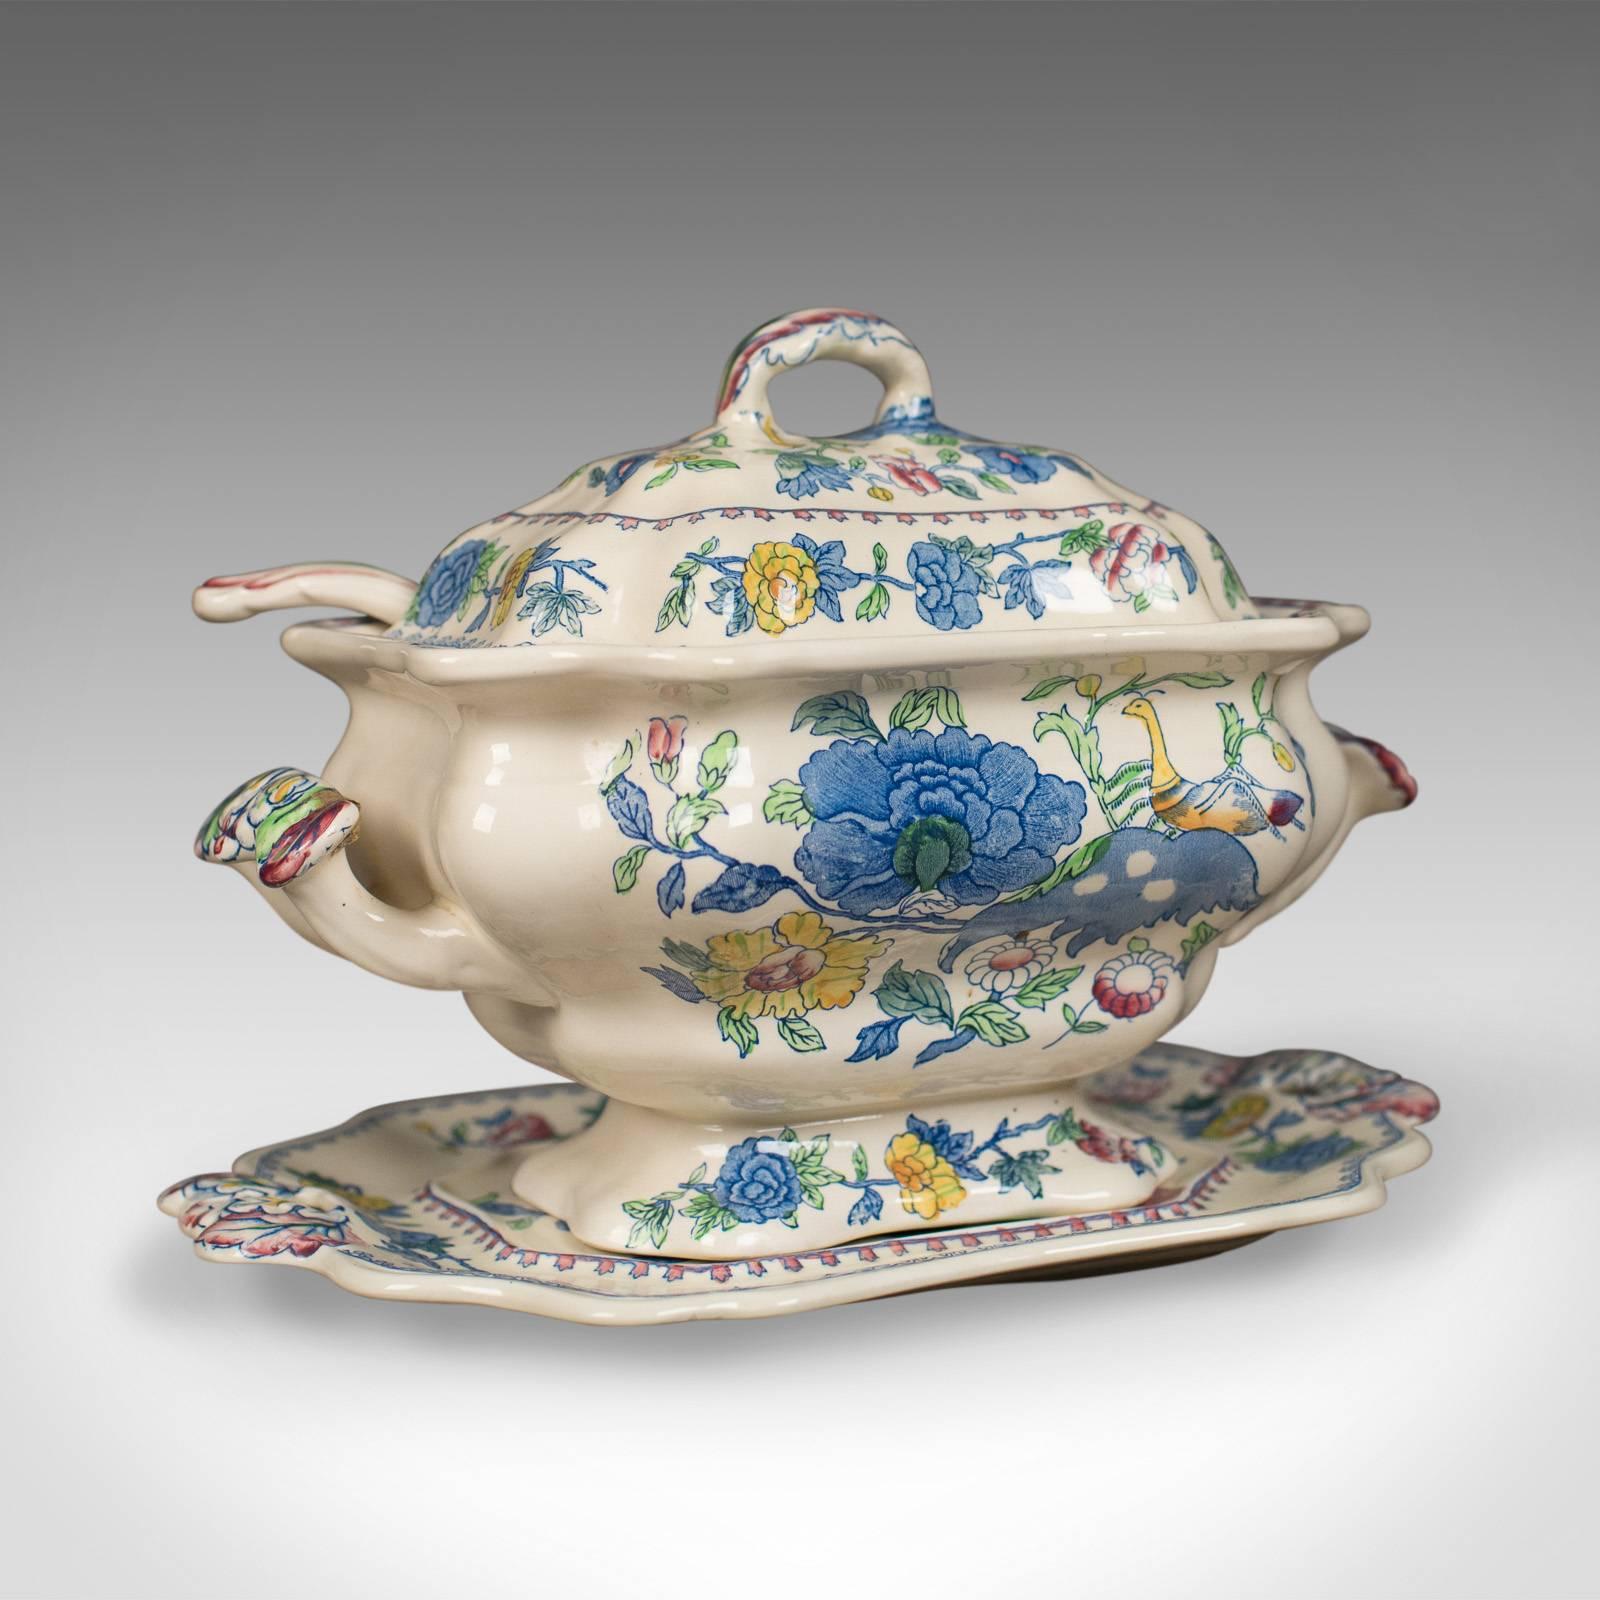 This is a 'Mason's Ironstone China' soup tureen, under-plate and ladle in the Regency design, dating to circa 1940.

In very good condition, free-from any chips or marks
Bright colours to the attractive floral design
Complete with ladle and